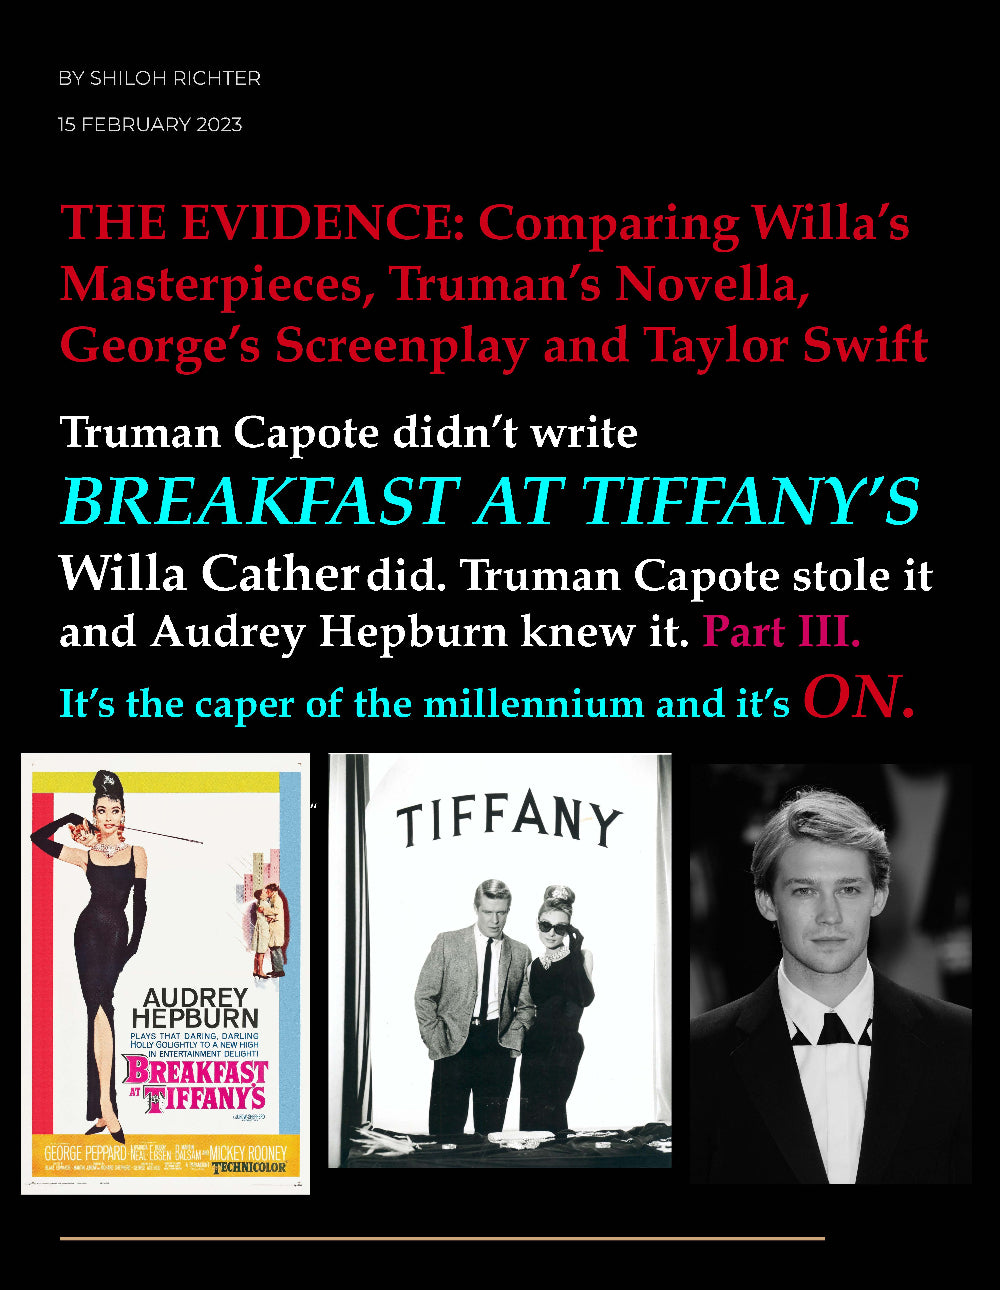 The Evidence: Comparing Willa's Masterpieces, Truman's Novella, George's Screenplay and Taylor Swift. It's the caper of the millennium and it's ON.